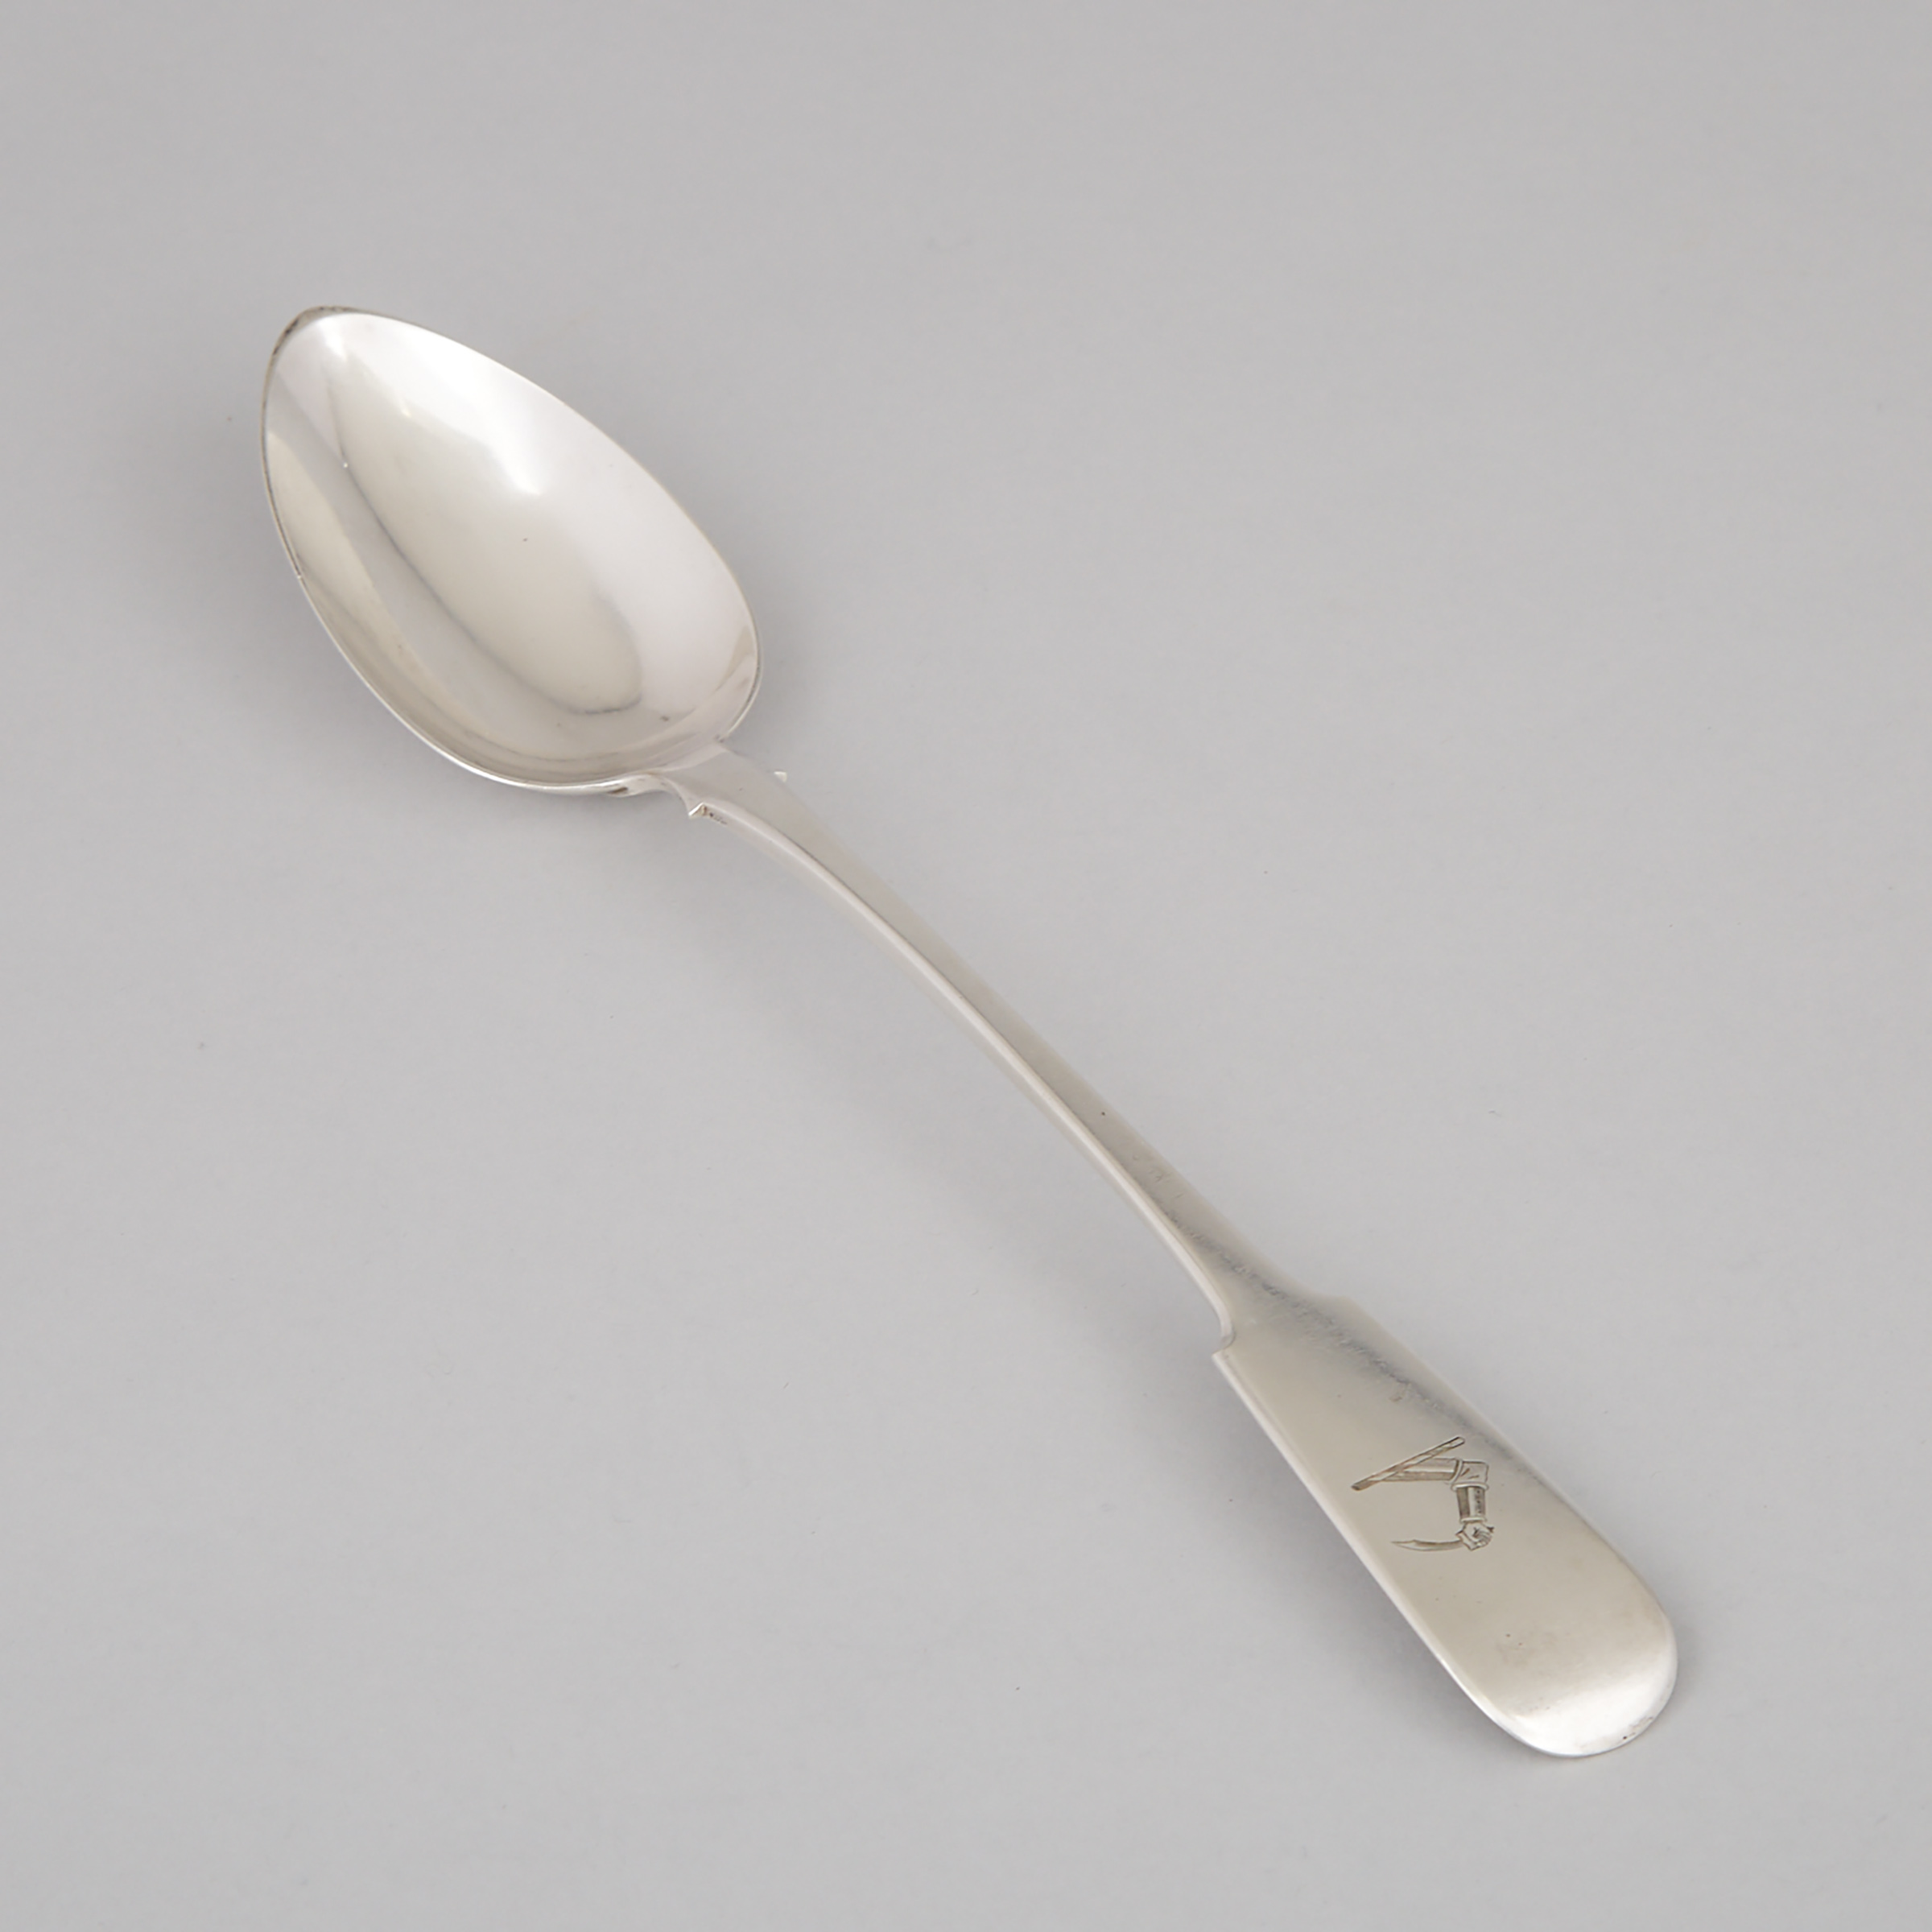 Canadian Silver Fiddle Pattern Serving Spoon, George Savage & Son, Montreal, Que., c.1829-43